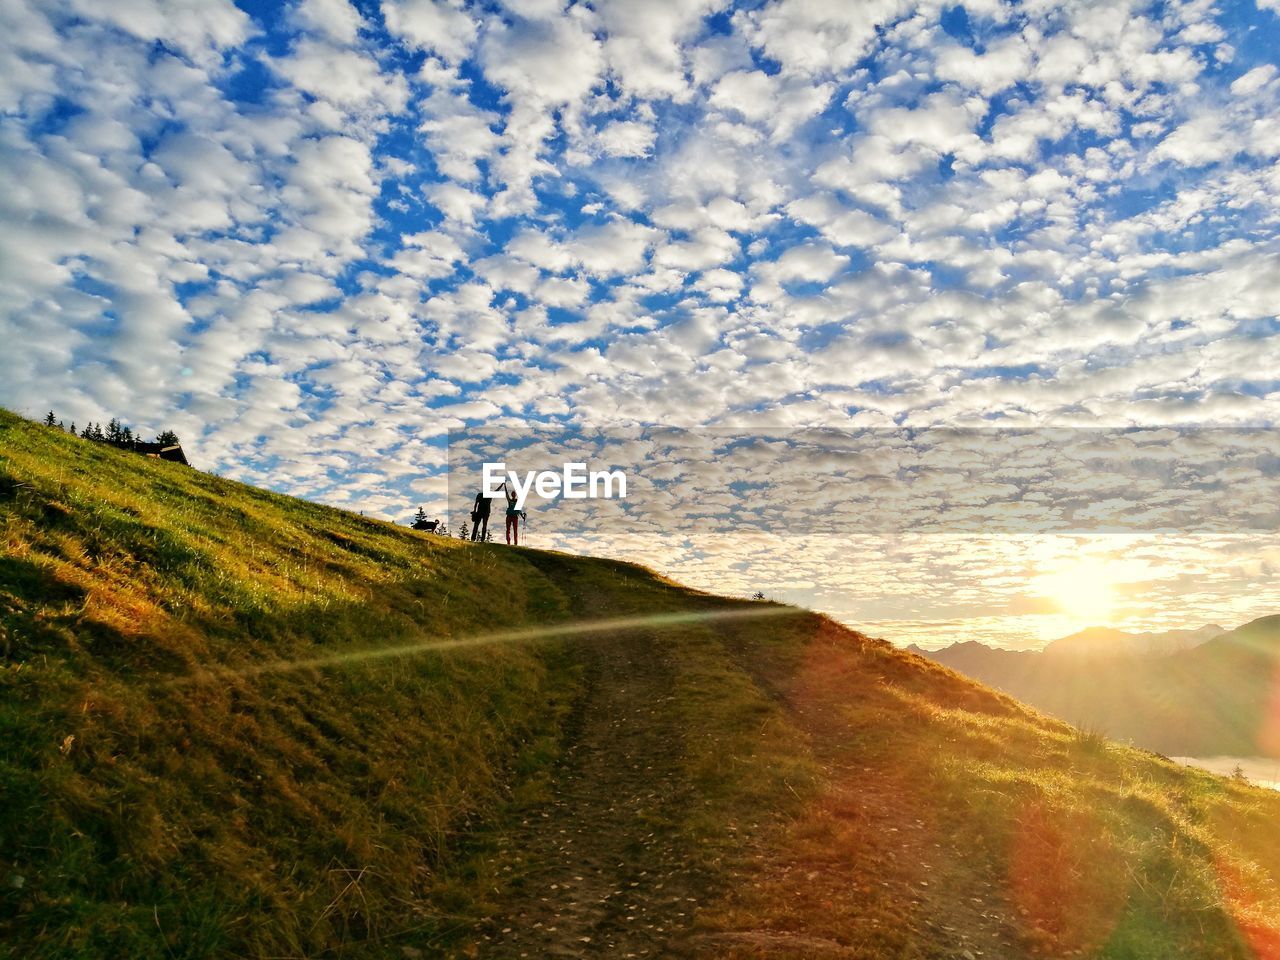 SCENIC VIEW OF LAND AGAINST SKY DURING SUNSET